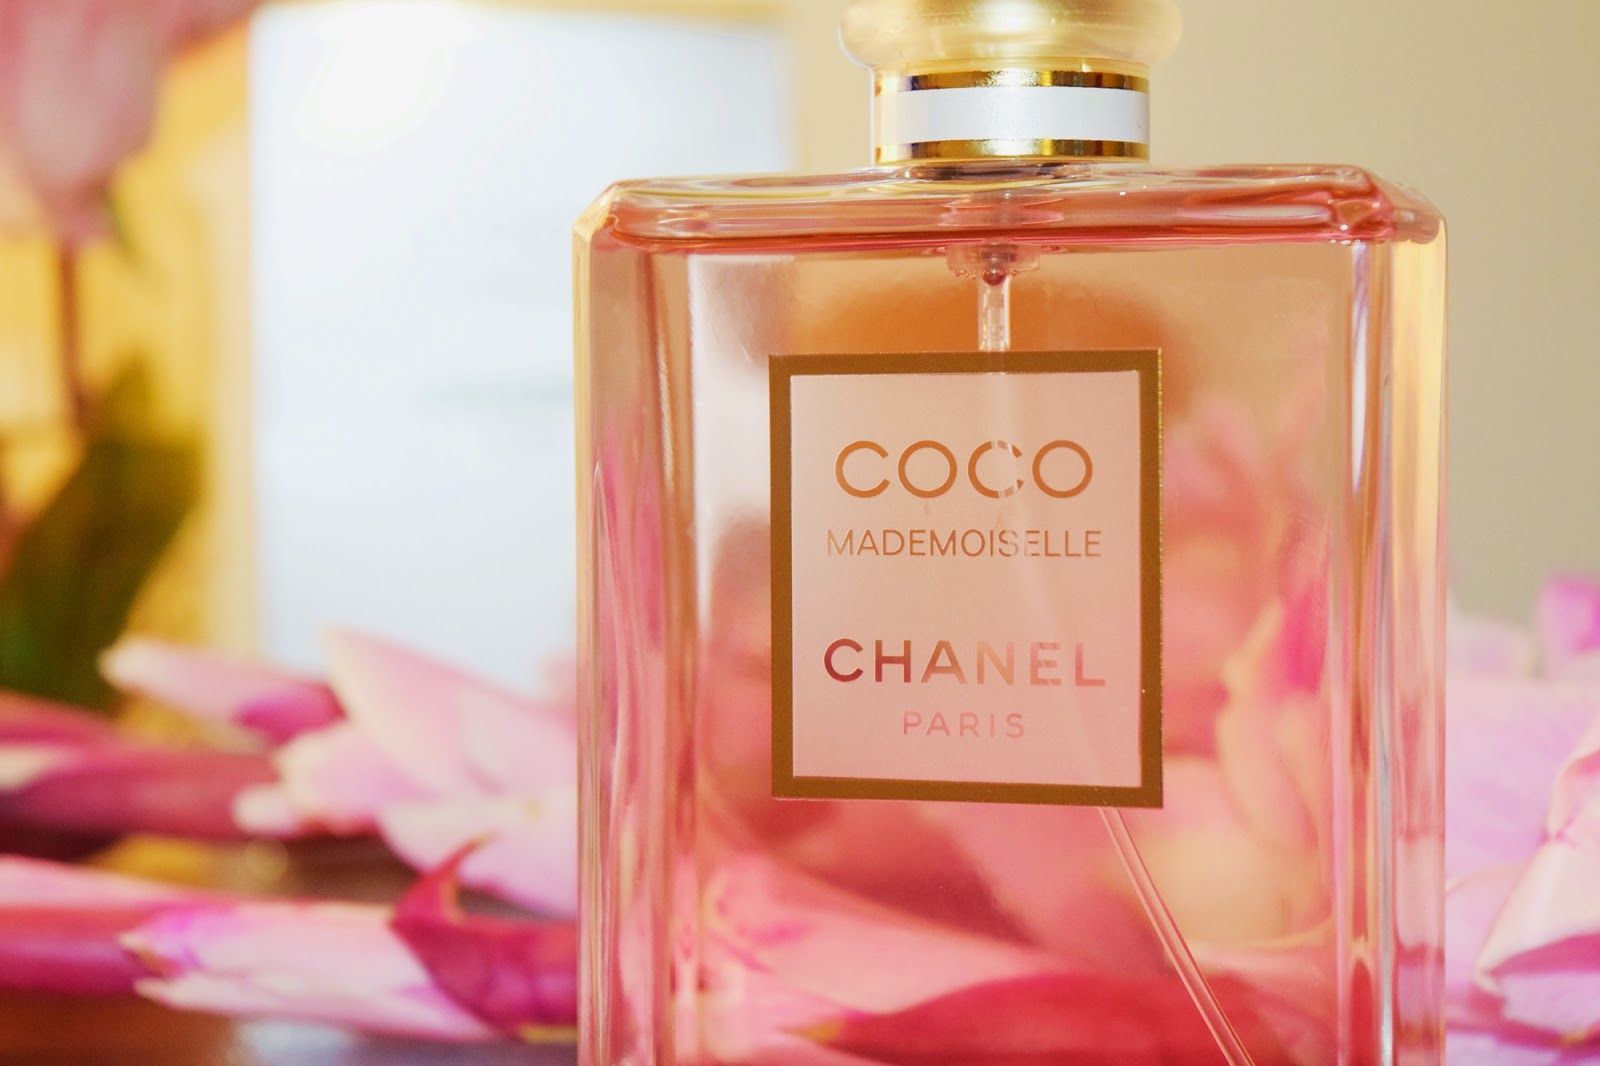 Why is Coco Mademoiselle so expensive?